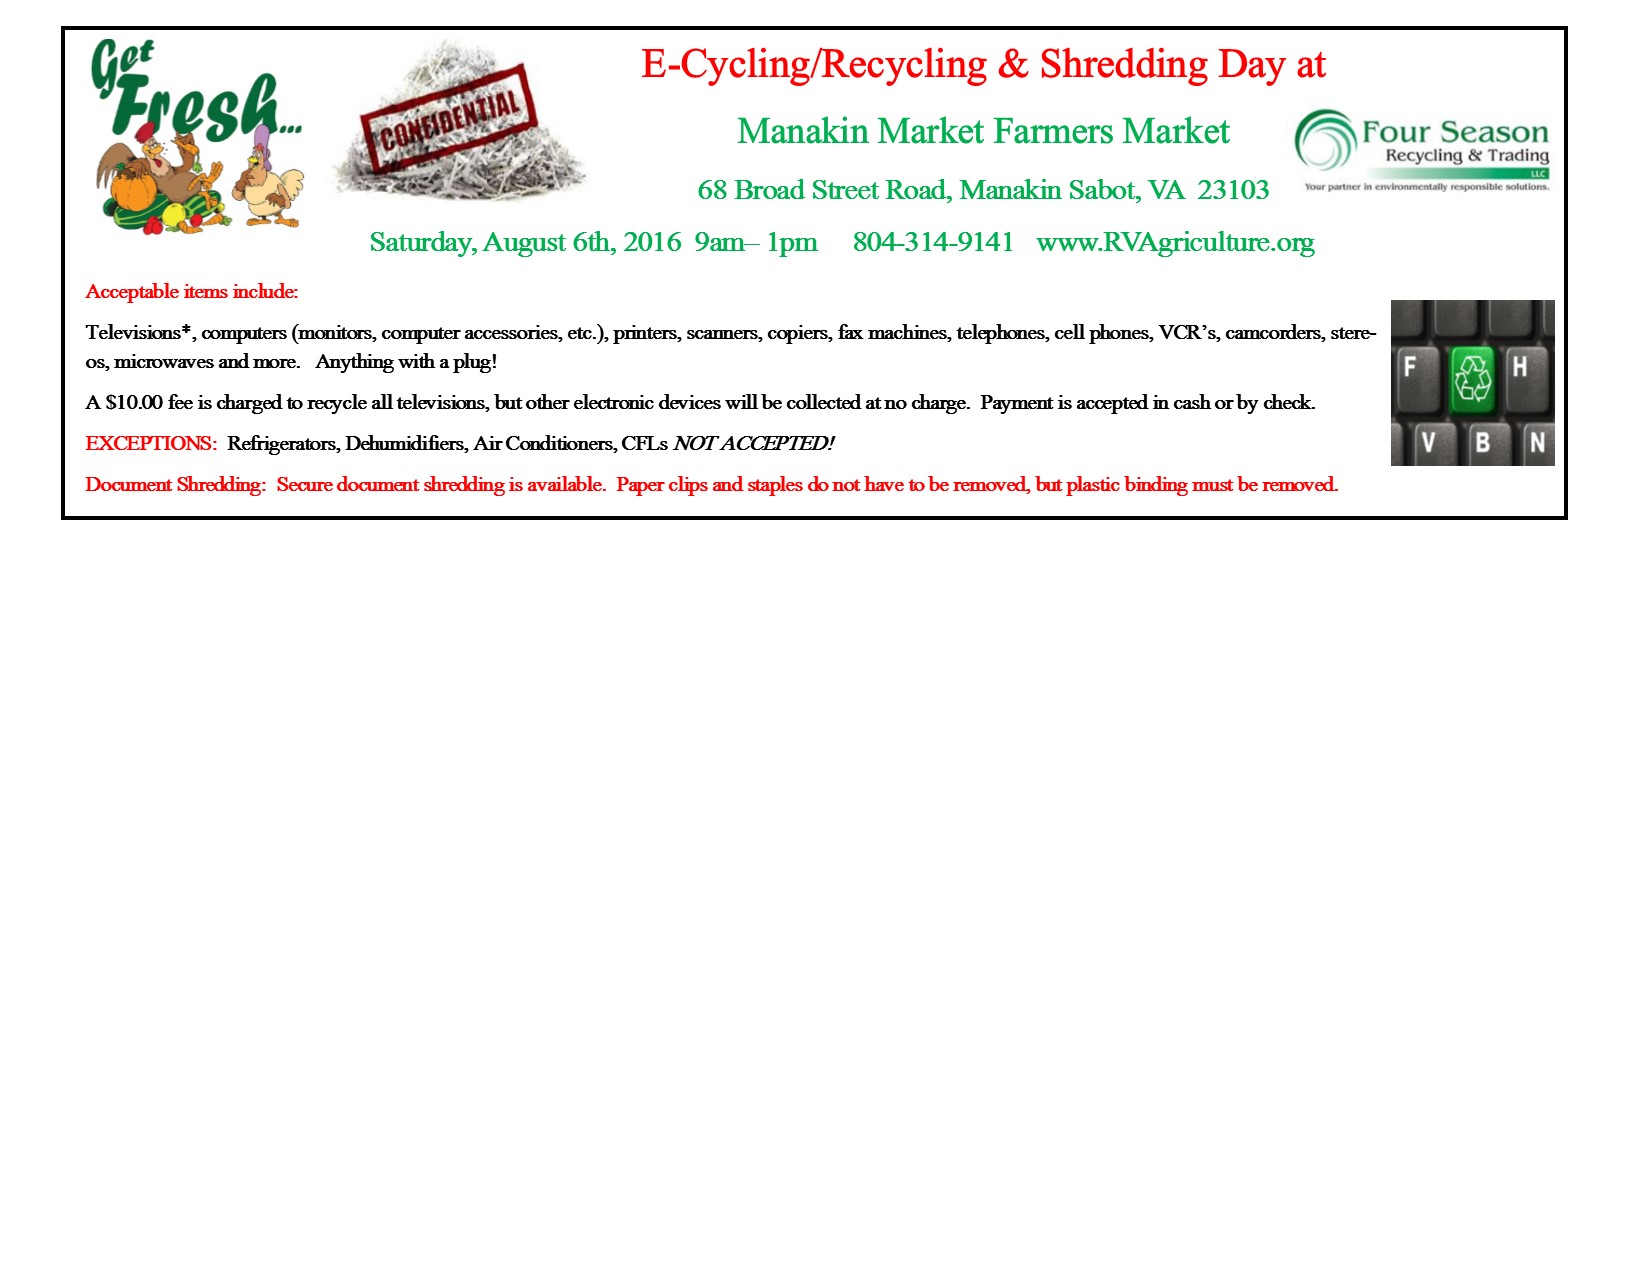 6th Annual E-Cycling/Recycling Day